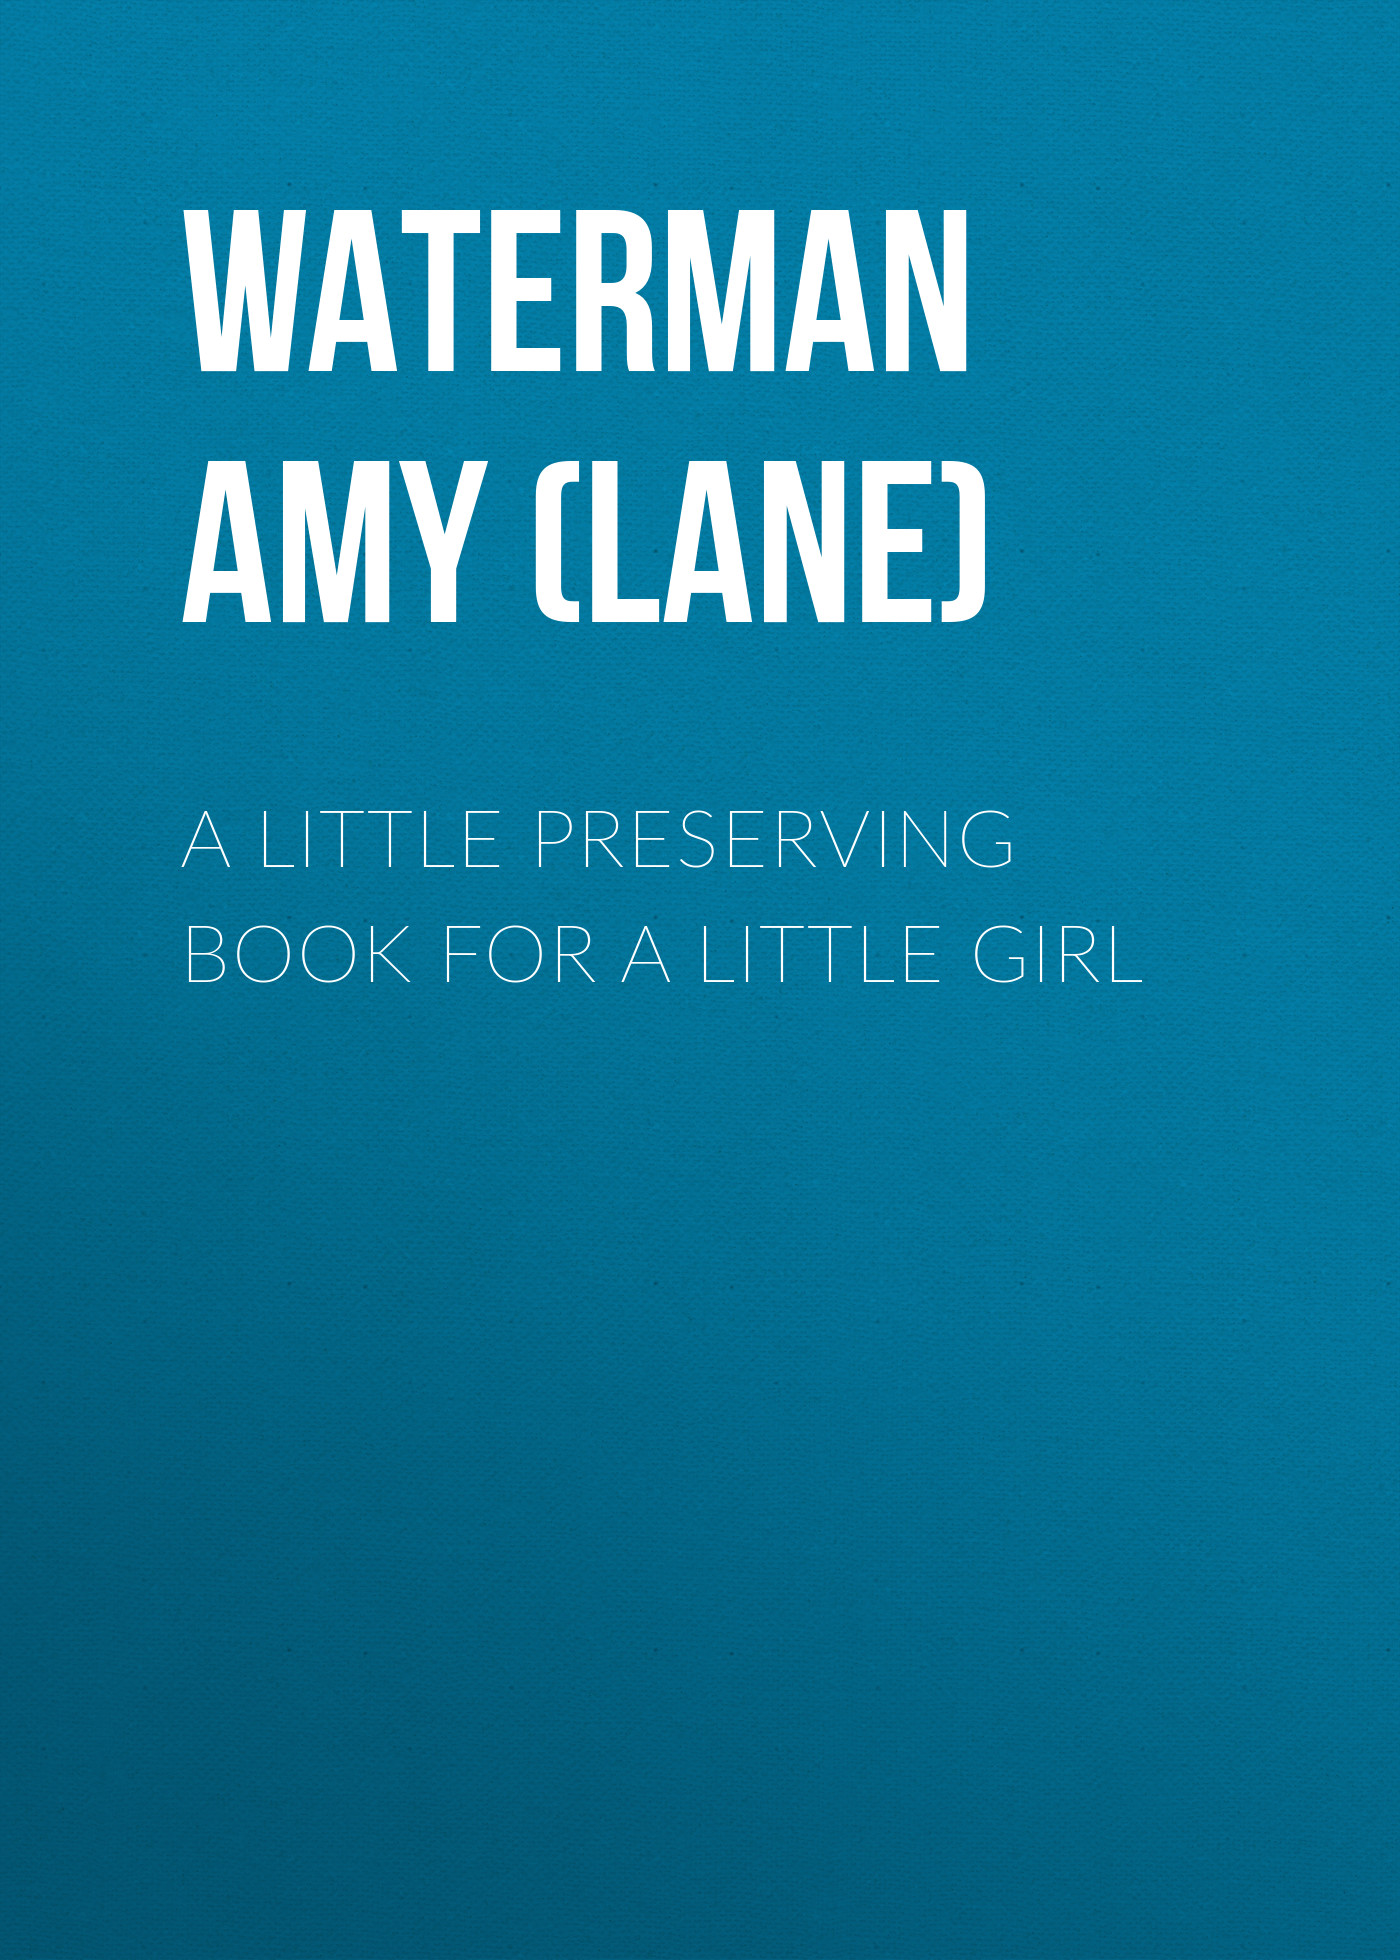 Waterman Amy Harlow (Lane) A Little Preserving Book for a Little Girl